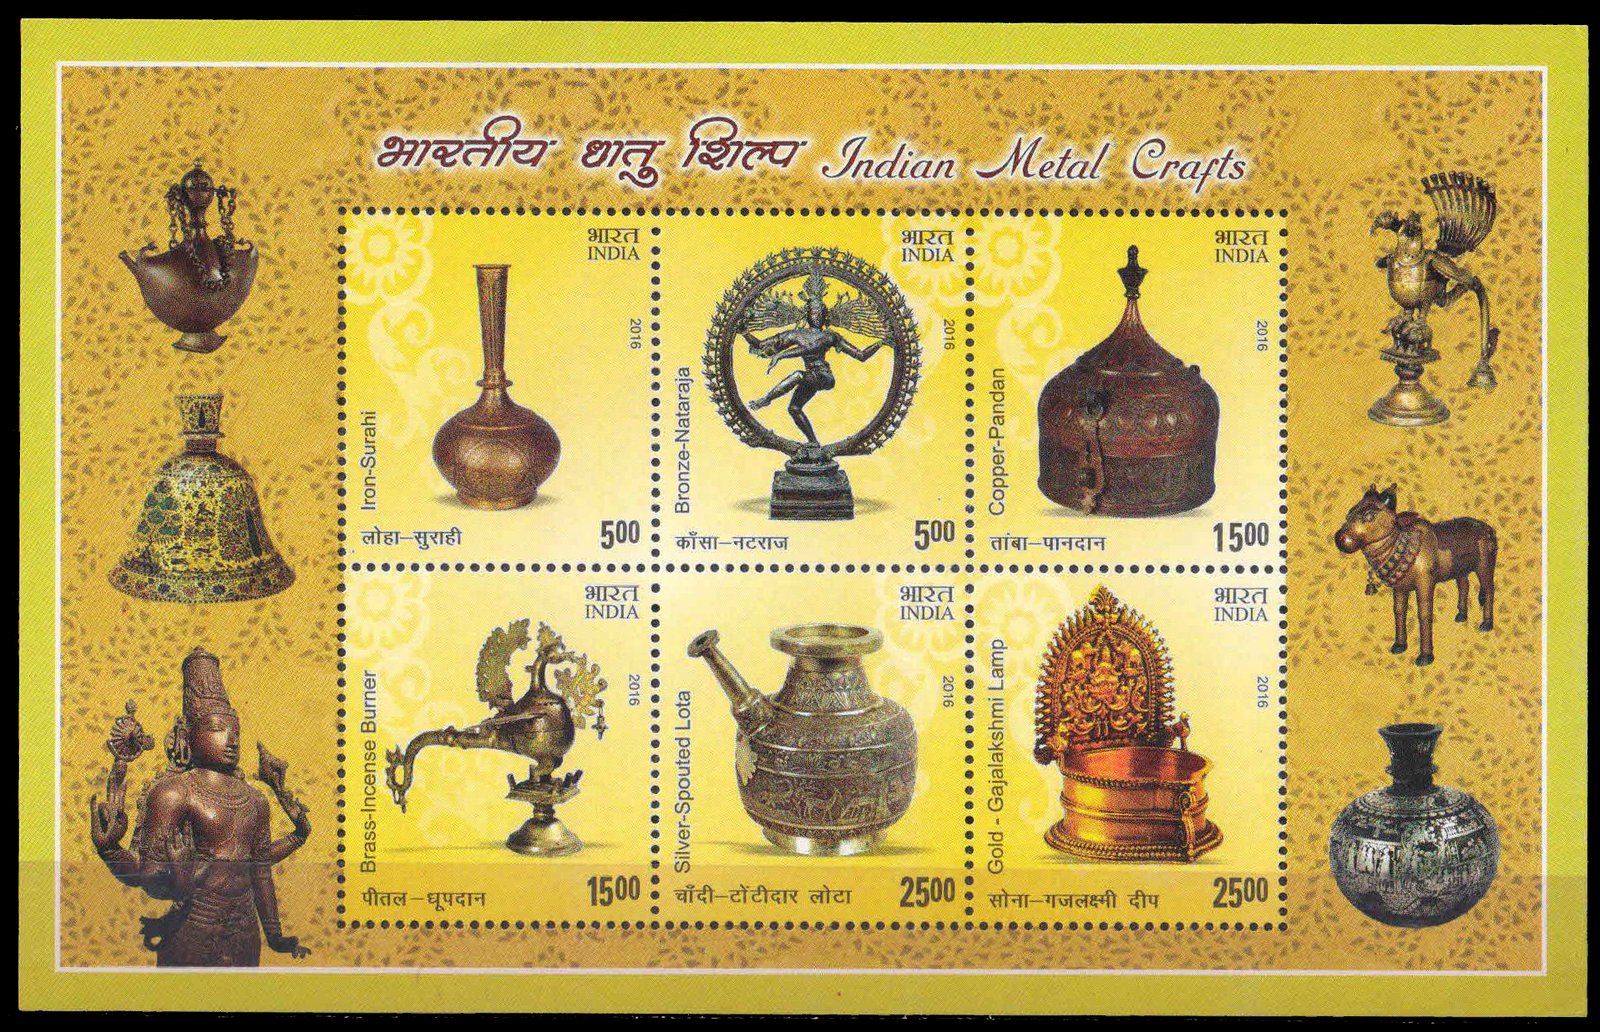 2016 - India Metal Crafts,  MS of 6 Stamps